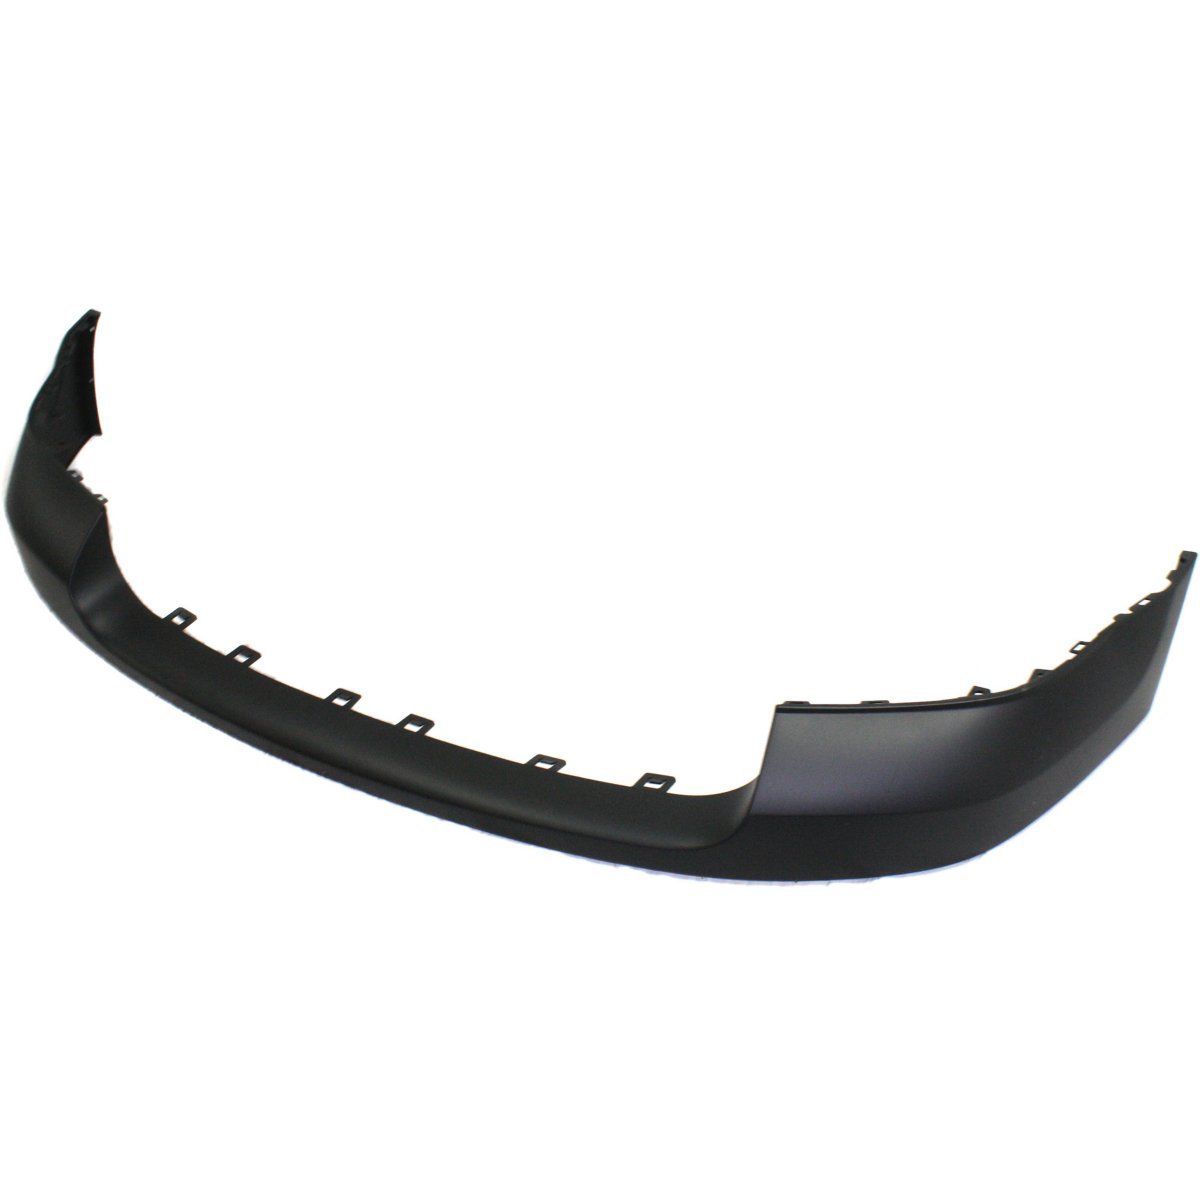 2007-2010 GMC SIERRA Front Bumper Cover 2500/3500  Black Painted to Match